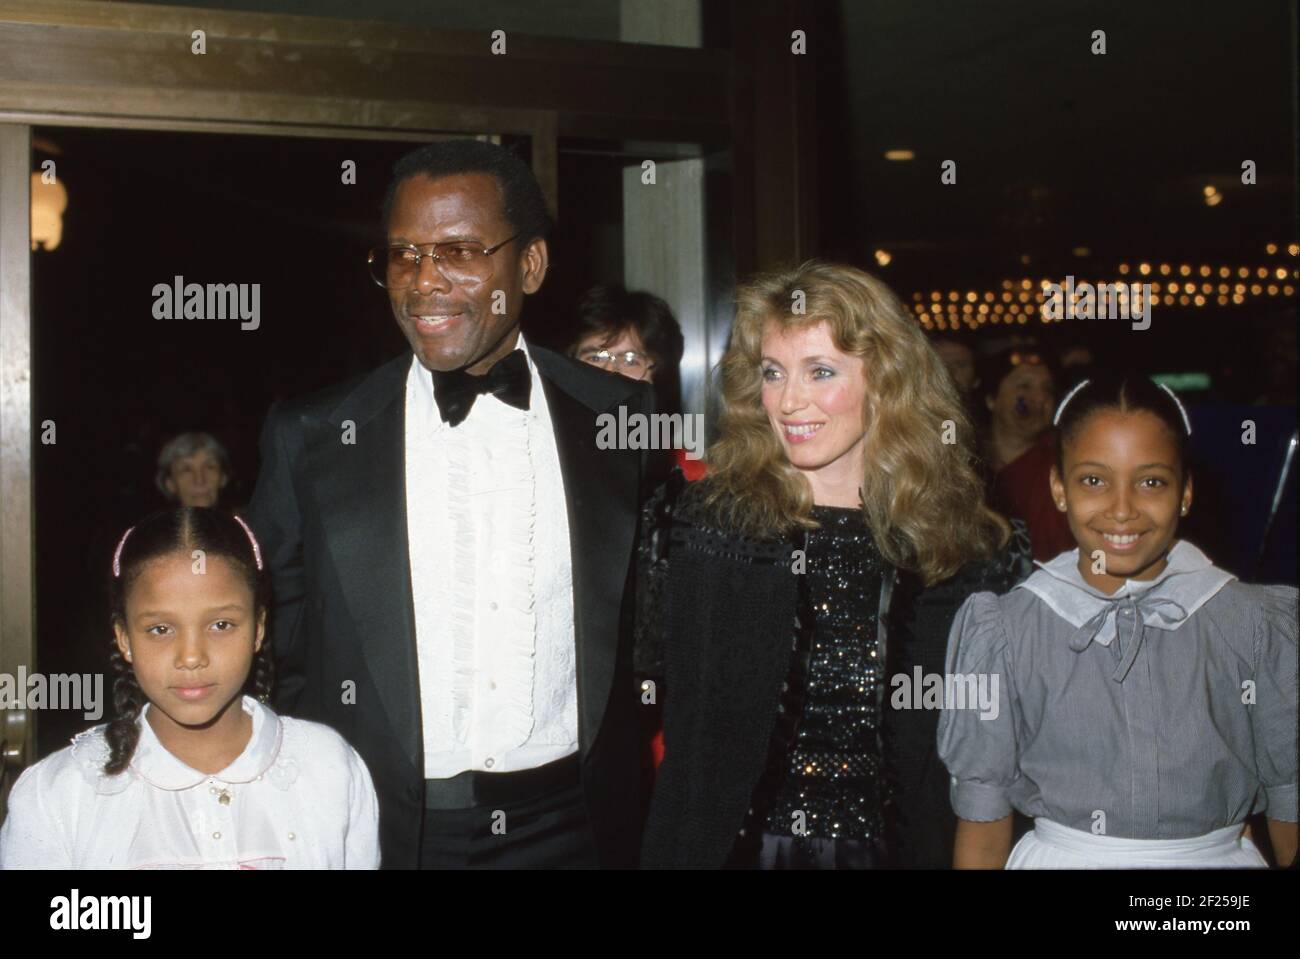 CENTURY CITY, CA - MARCH 20: Sidney Poitier, wife Joanna Shimkus and daughters attend the opening of 'Dreamgirls' on March 20, 1983 at the Shubert Theater in Century City, Californi Credit: Ralph Dominguez/MediaPunch Stock Photo